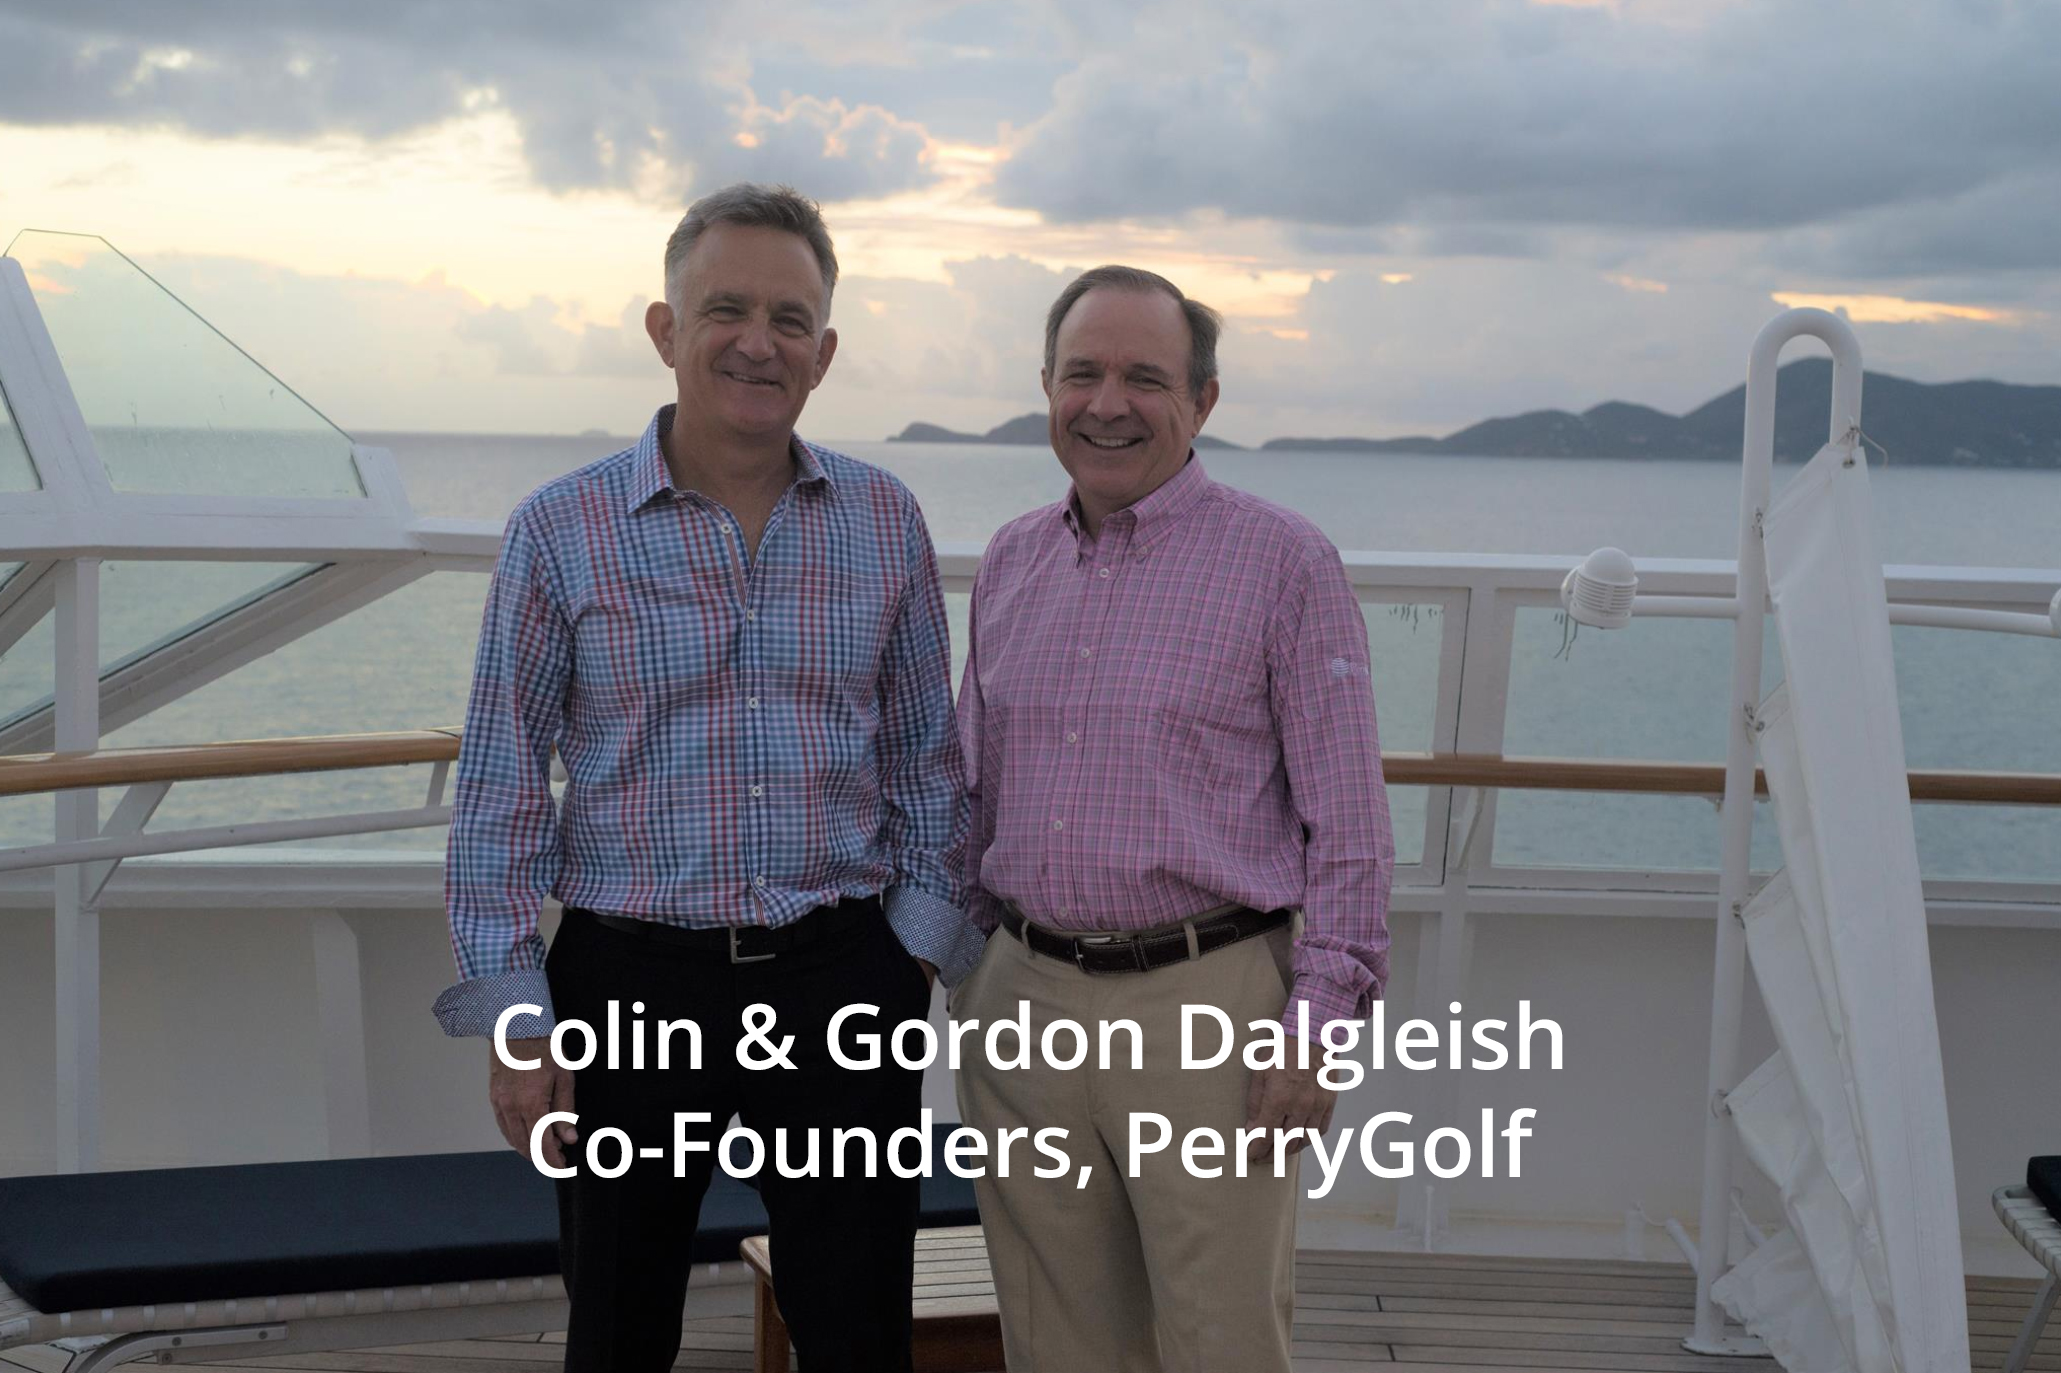 Colin & Gordon Dalgleish, Co-Founders of PerryGolf